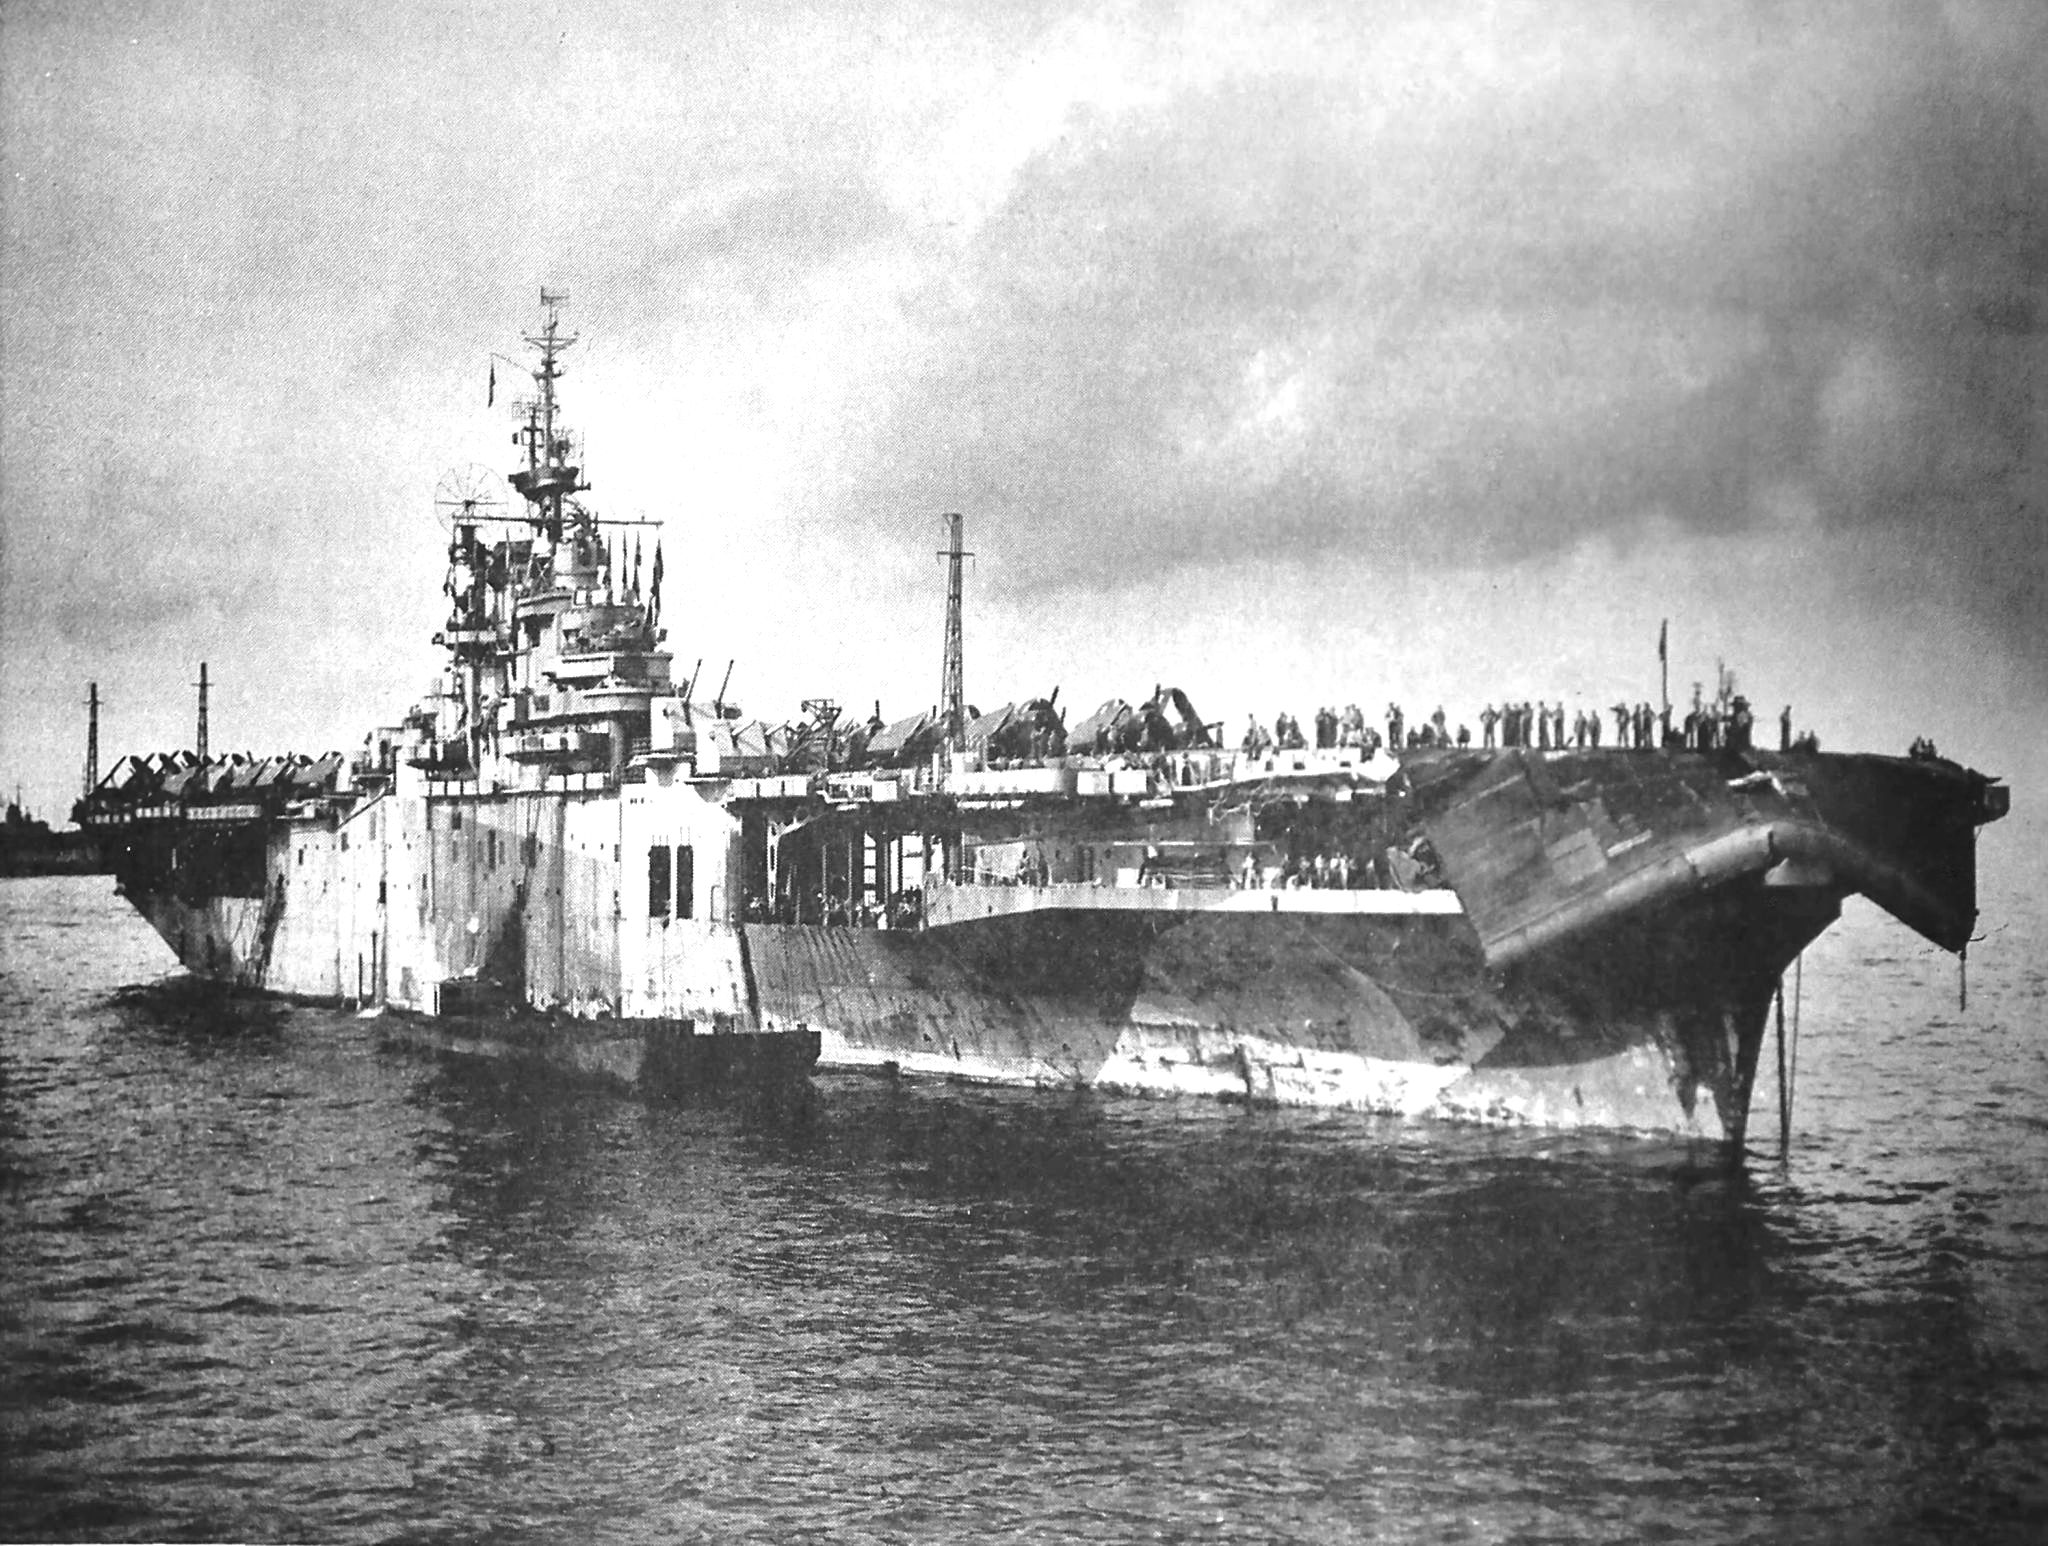 Damage from Typhoon Connie to the forward flight deck of USS Bennington as seen after the ship’s arrival in San Pedro Bay, Leyte, Philippines, 12 Jun 1945. Photo 1 of 3.